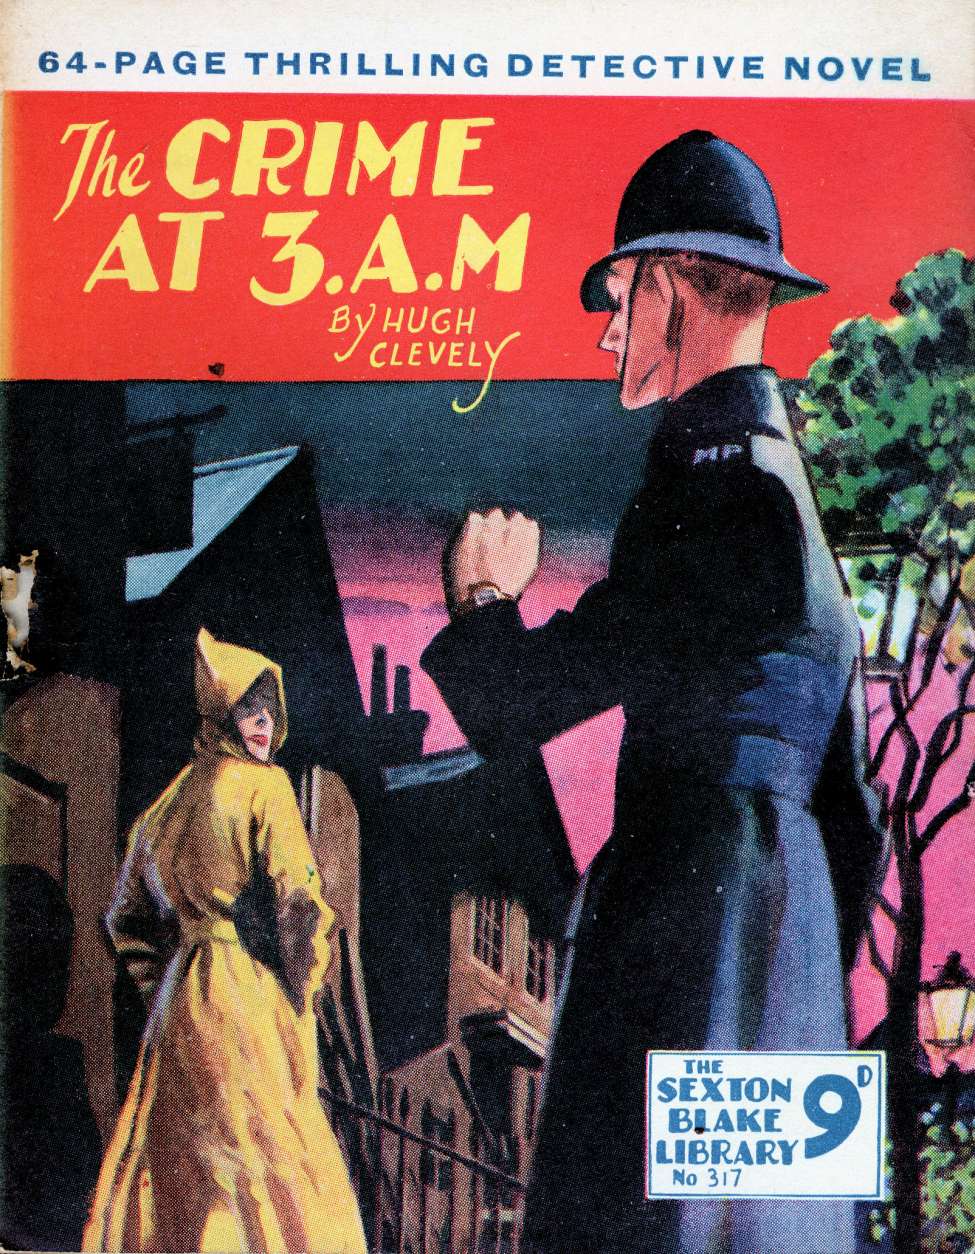 Book Cover For Sexton Blake Library S3 317 - The Crime at 3.a.m